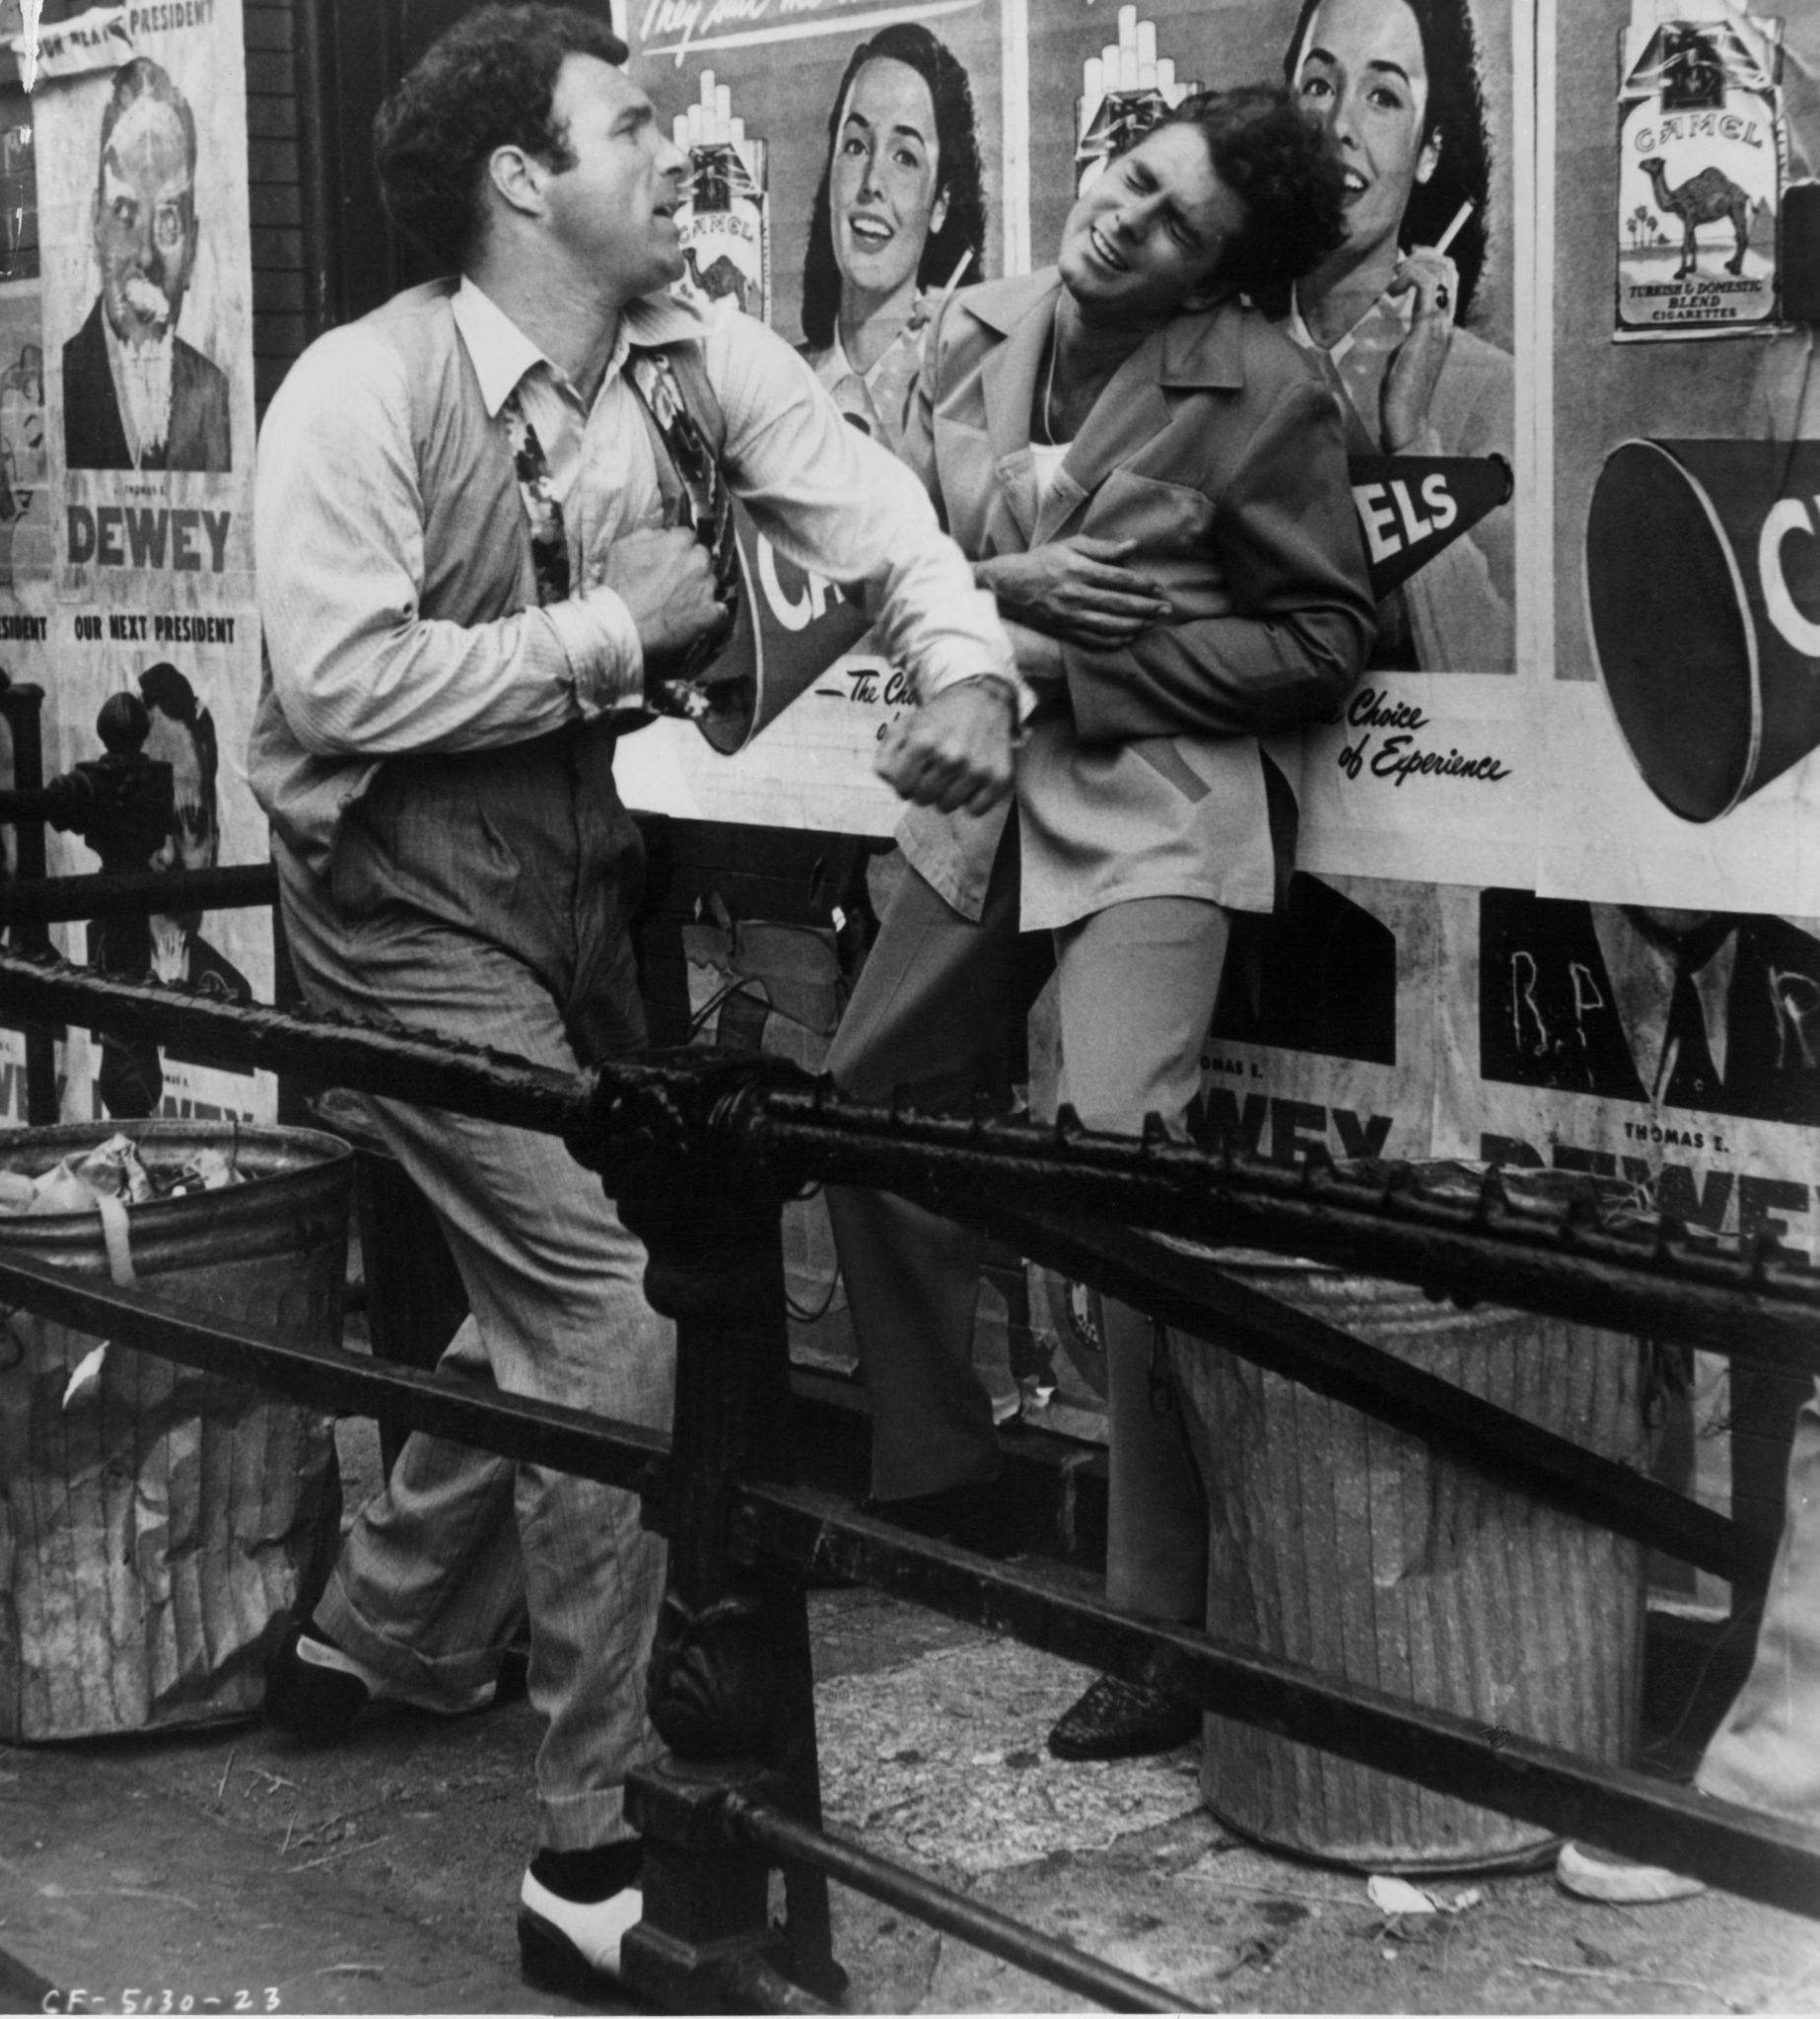 Still of James Caan and Gianni Russo in Krikstatevis (1972)